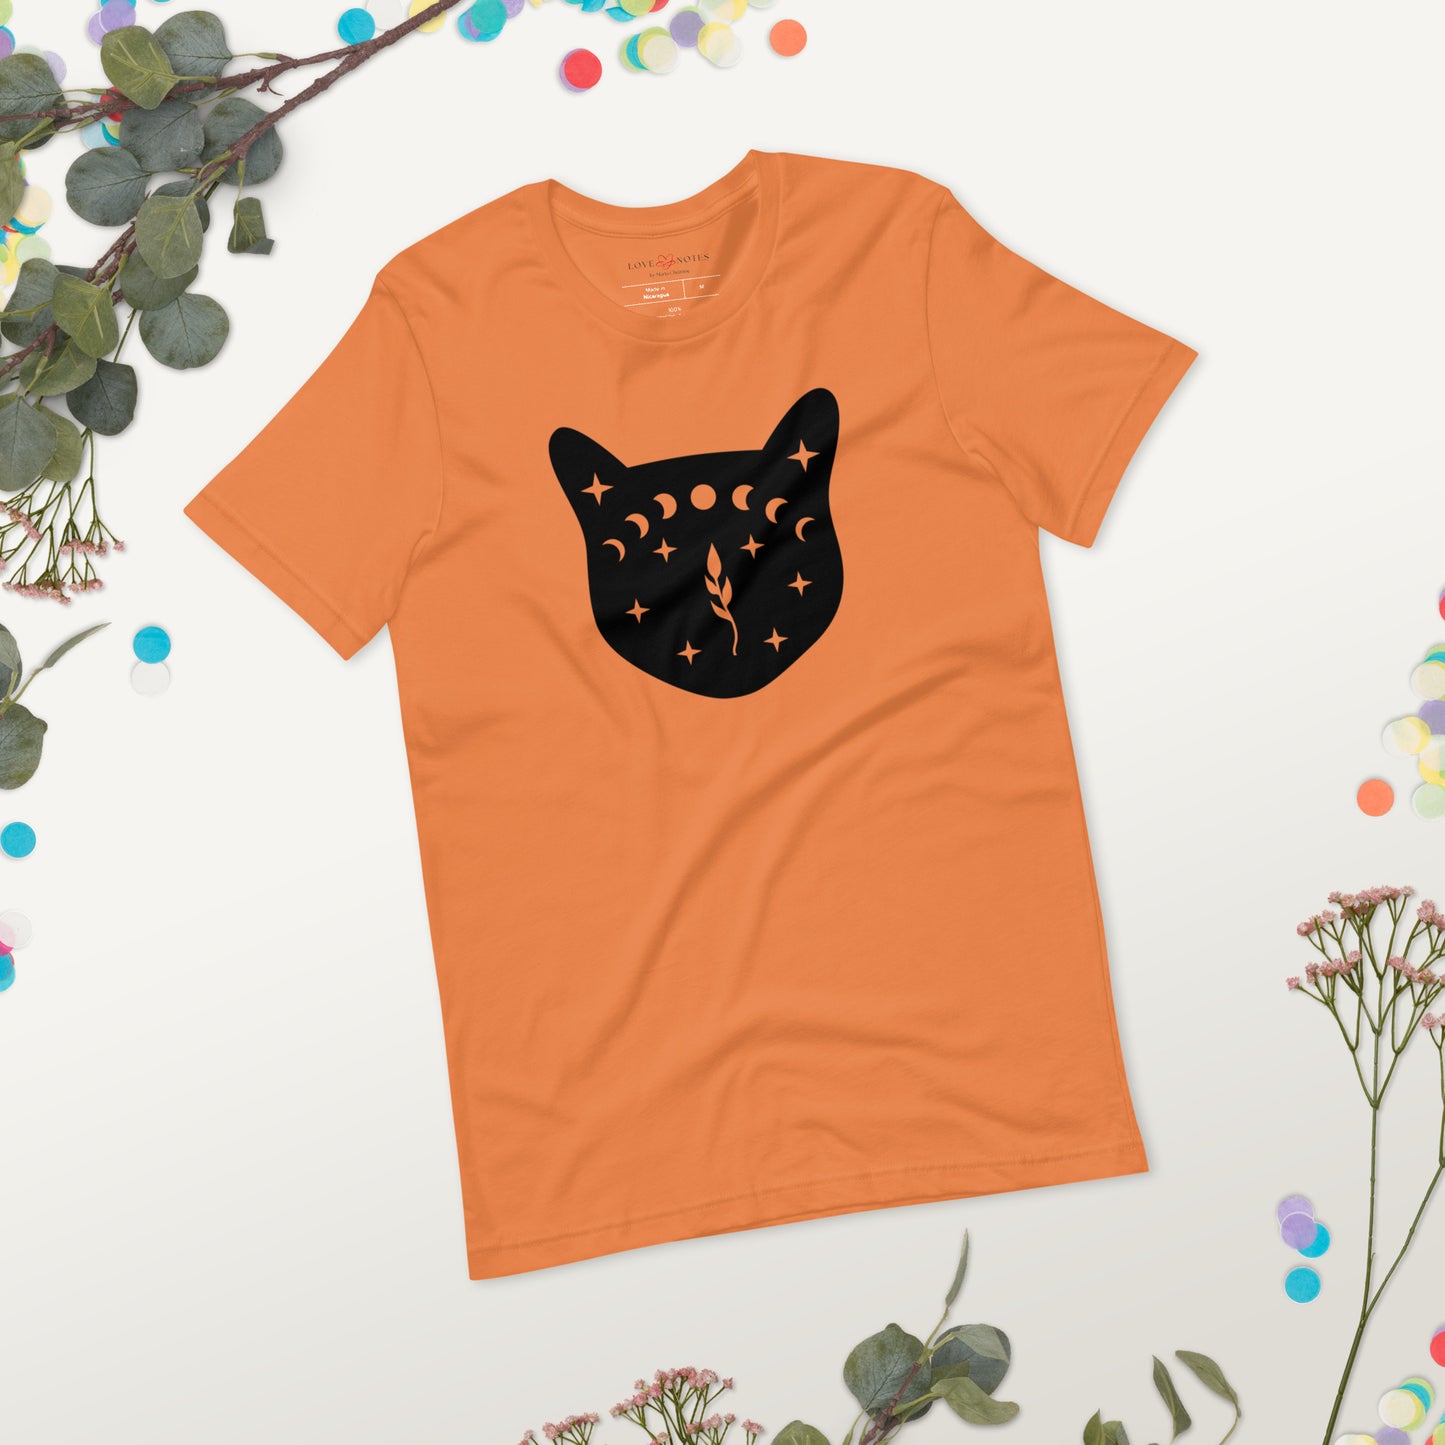 Unisex Tee: Black Cat Face with Moon Phases